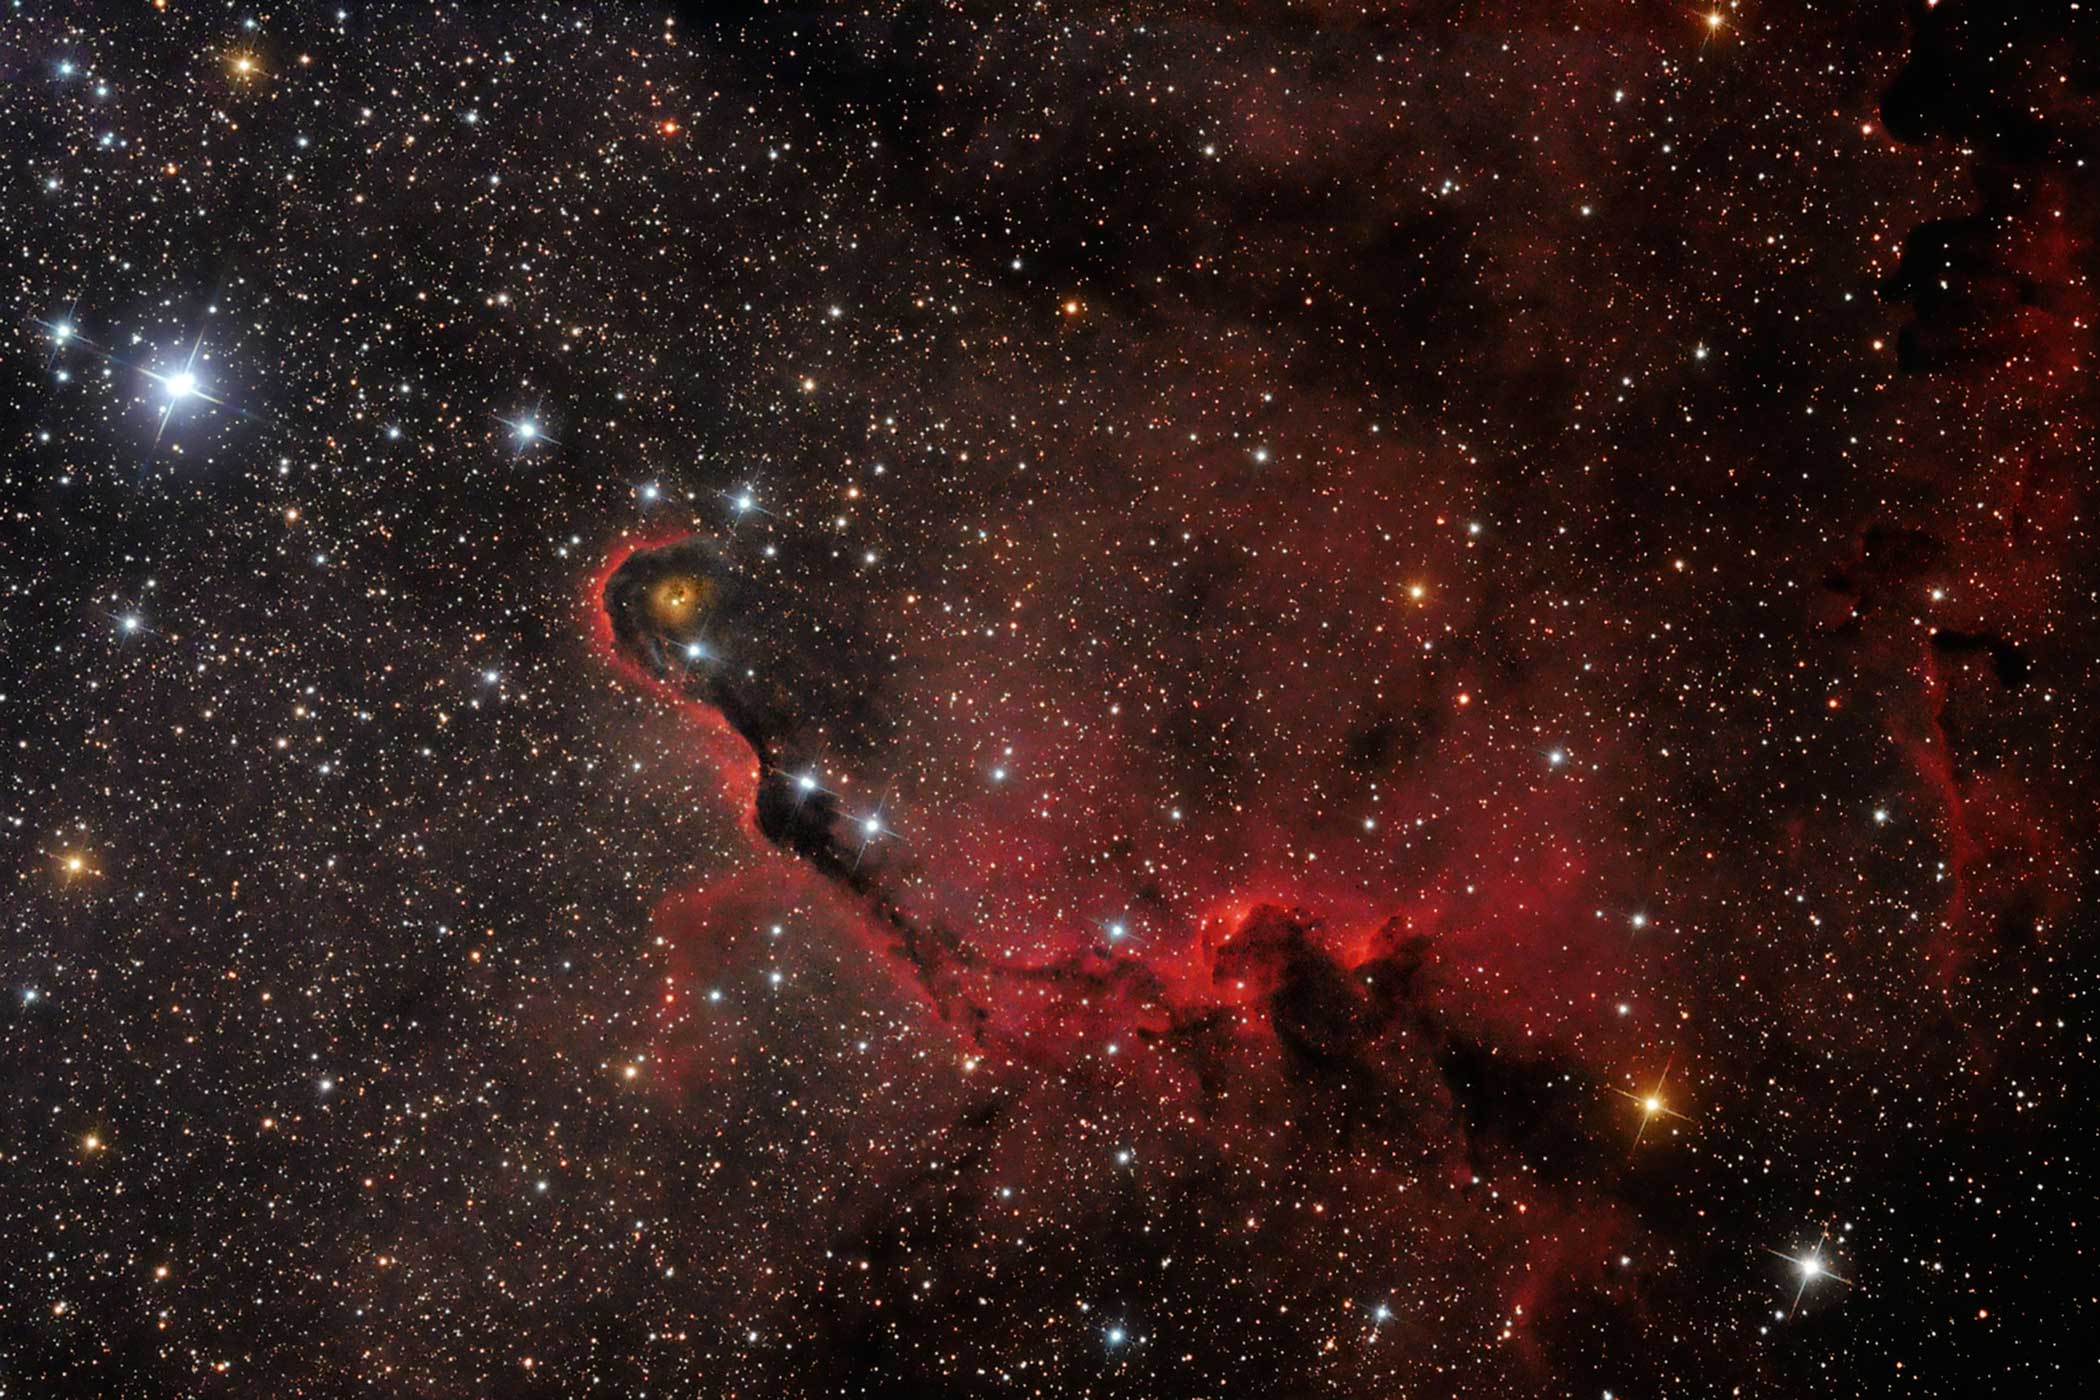 The Elephant's Trunk seems to uncoil from the dusty nebula on the right of the image, its tip curled around a cavity carved out by the radiation produced by young stars. Capturing a deep sky object like this takes skill and painstaking attention to detail and is a great achievement for a newcomer to astrophotography.